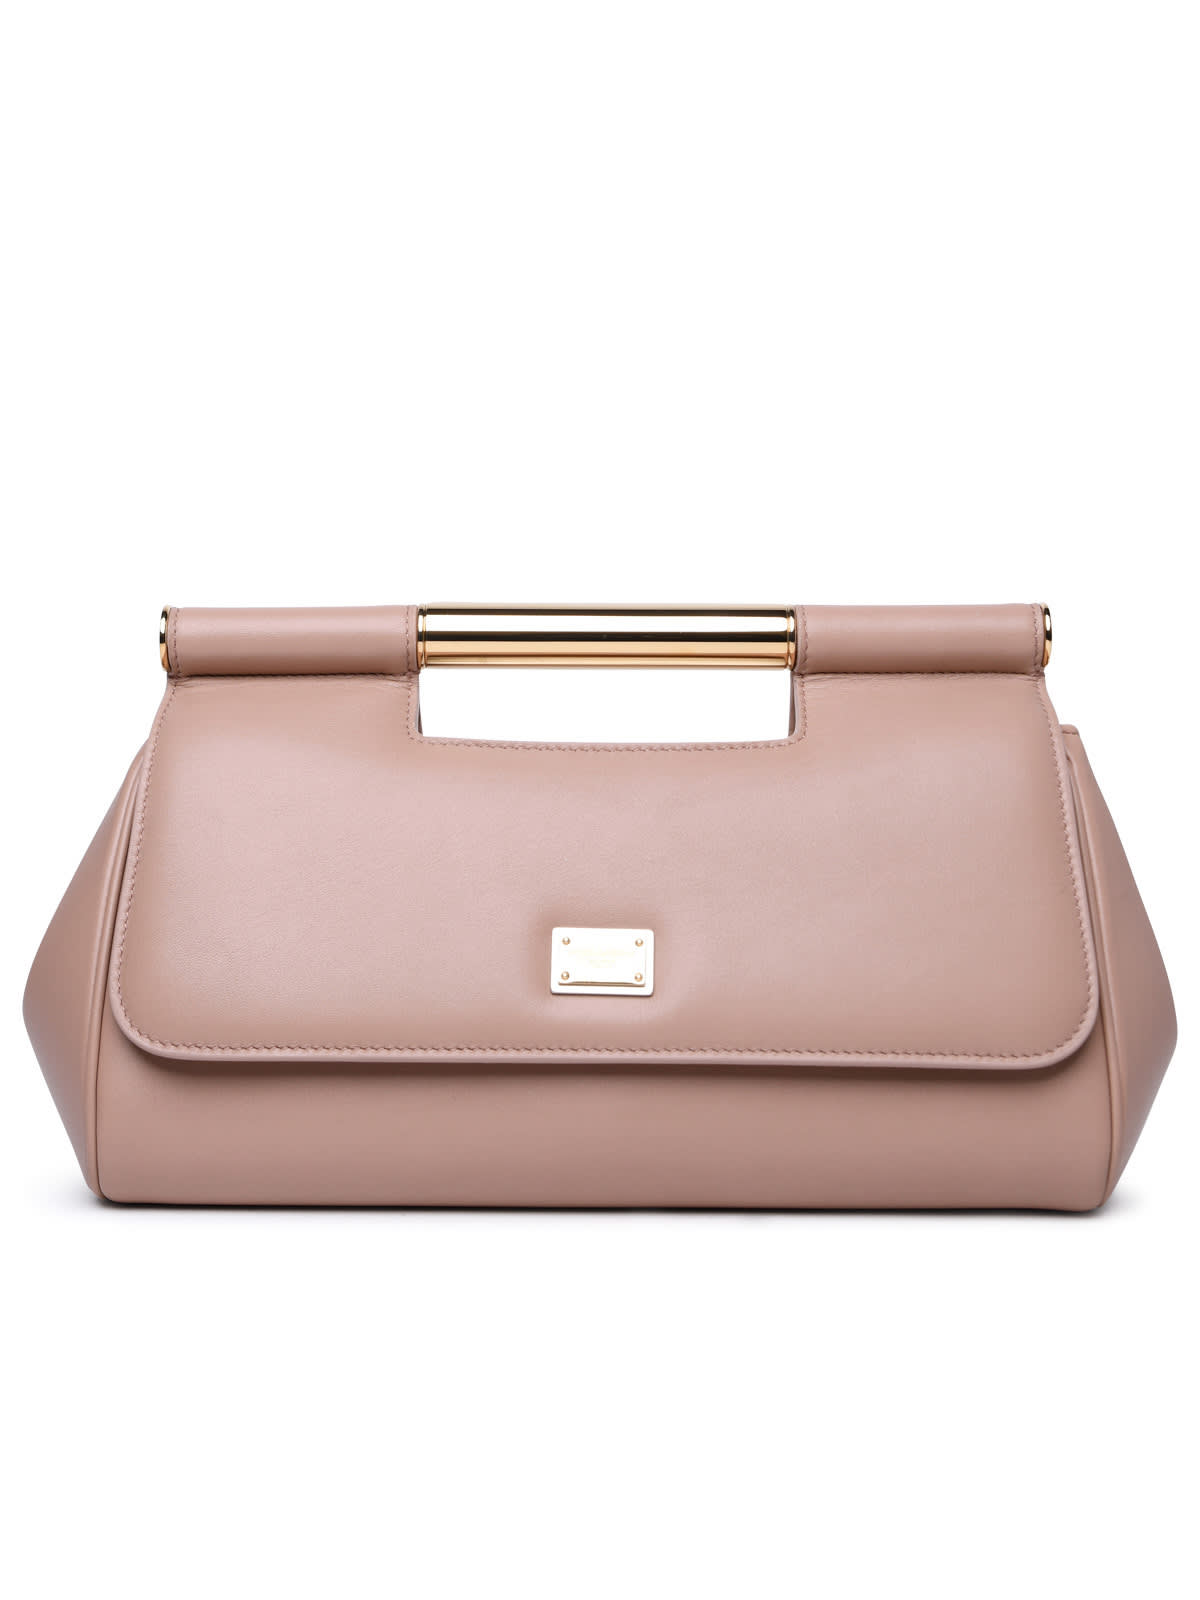 Dolce & Gabbana Sicily Large Leather Clutch Nude In Beige 2 (pink)